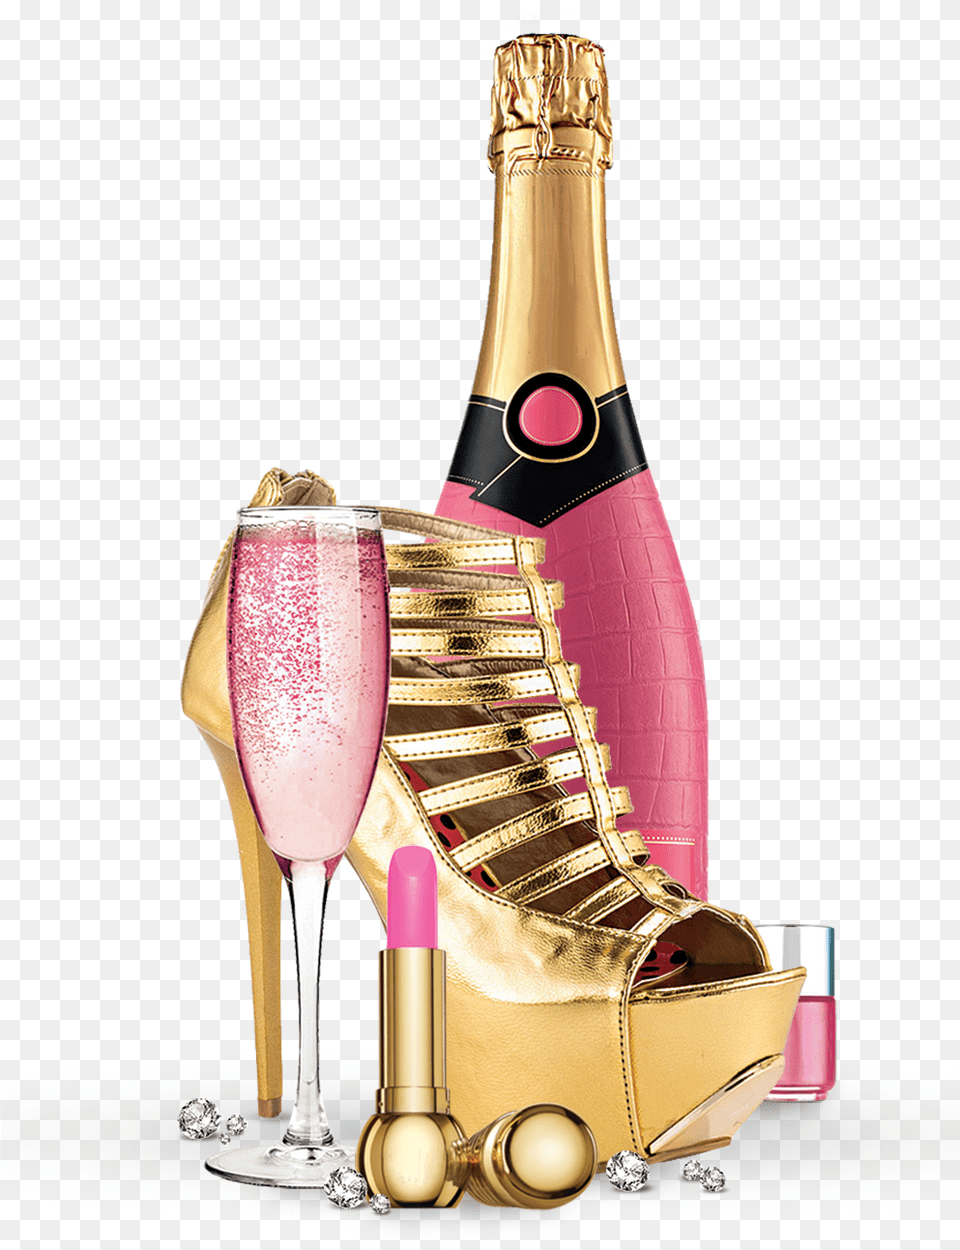 Champagne Cup Download Hd Clipart Pink Champagne Bottles, Shoe, Clothing, Footwear, High Heel Png